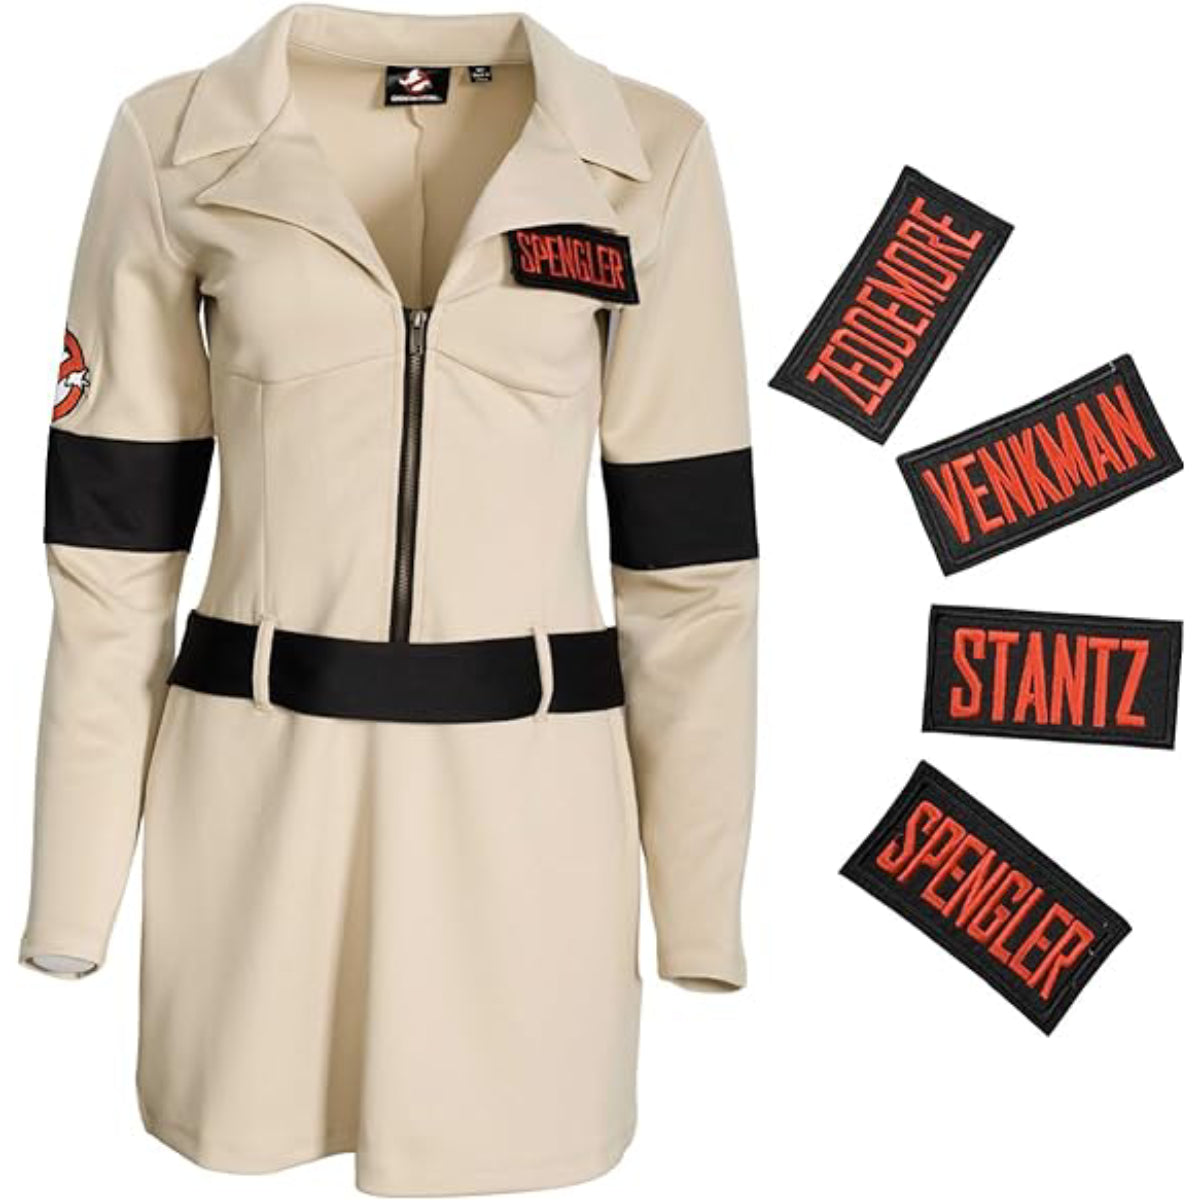 Ghostbusters Juniors Poly Dress Set Interchangeable Name Patches Halloween Costume Cosplay